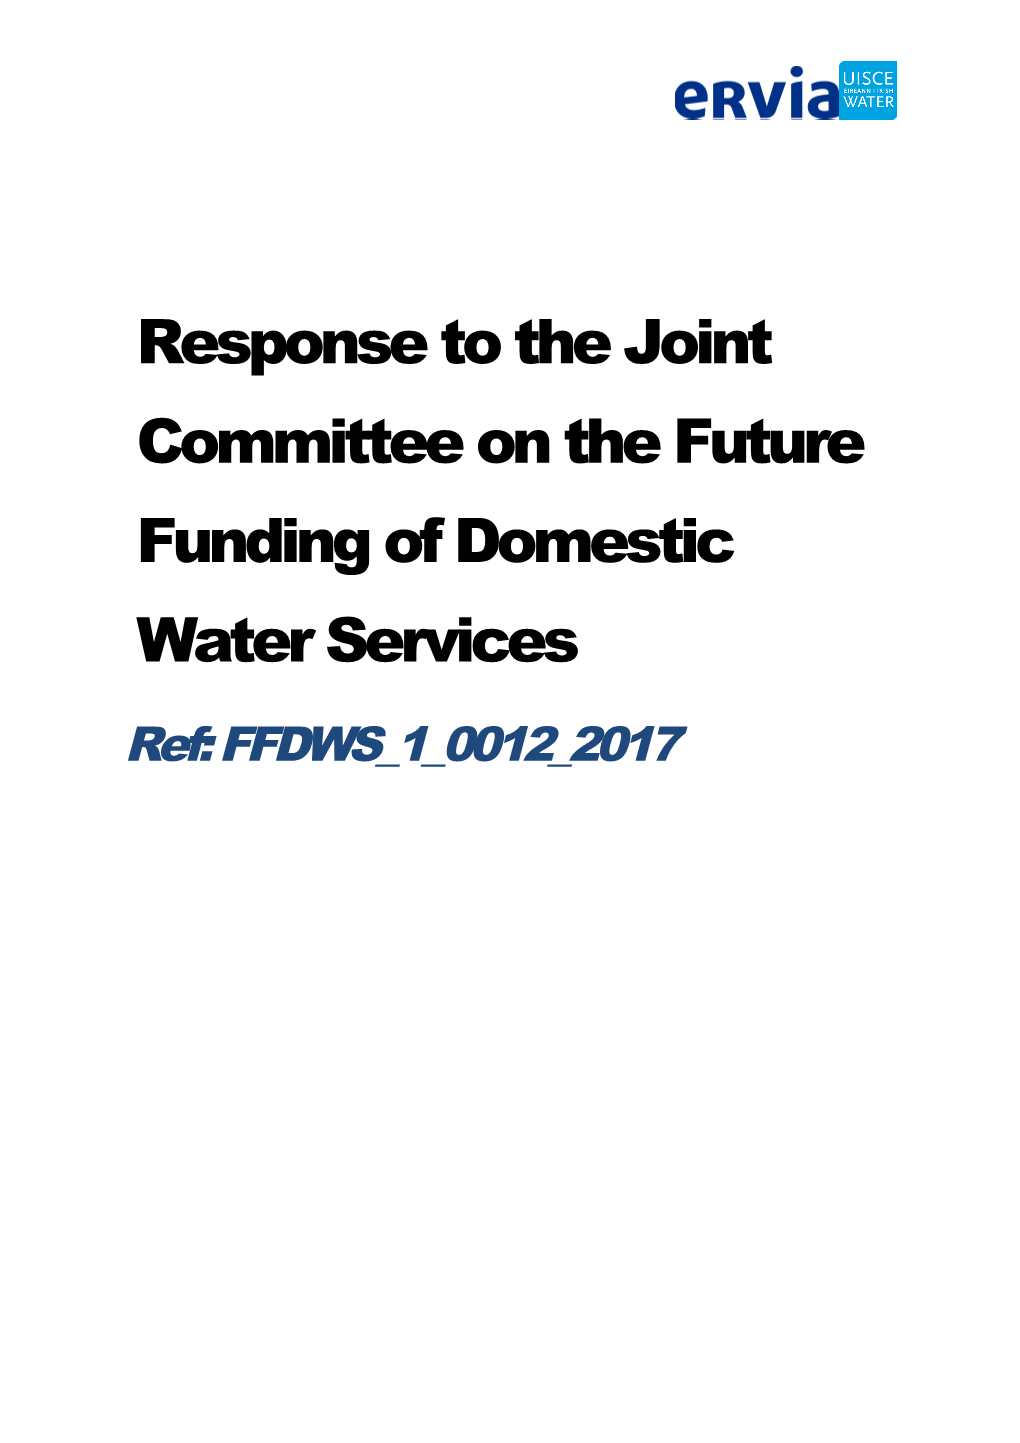 Response to the Joint Committee on the Future Funding of Domestic Water Services